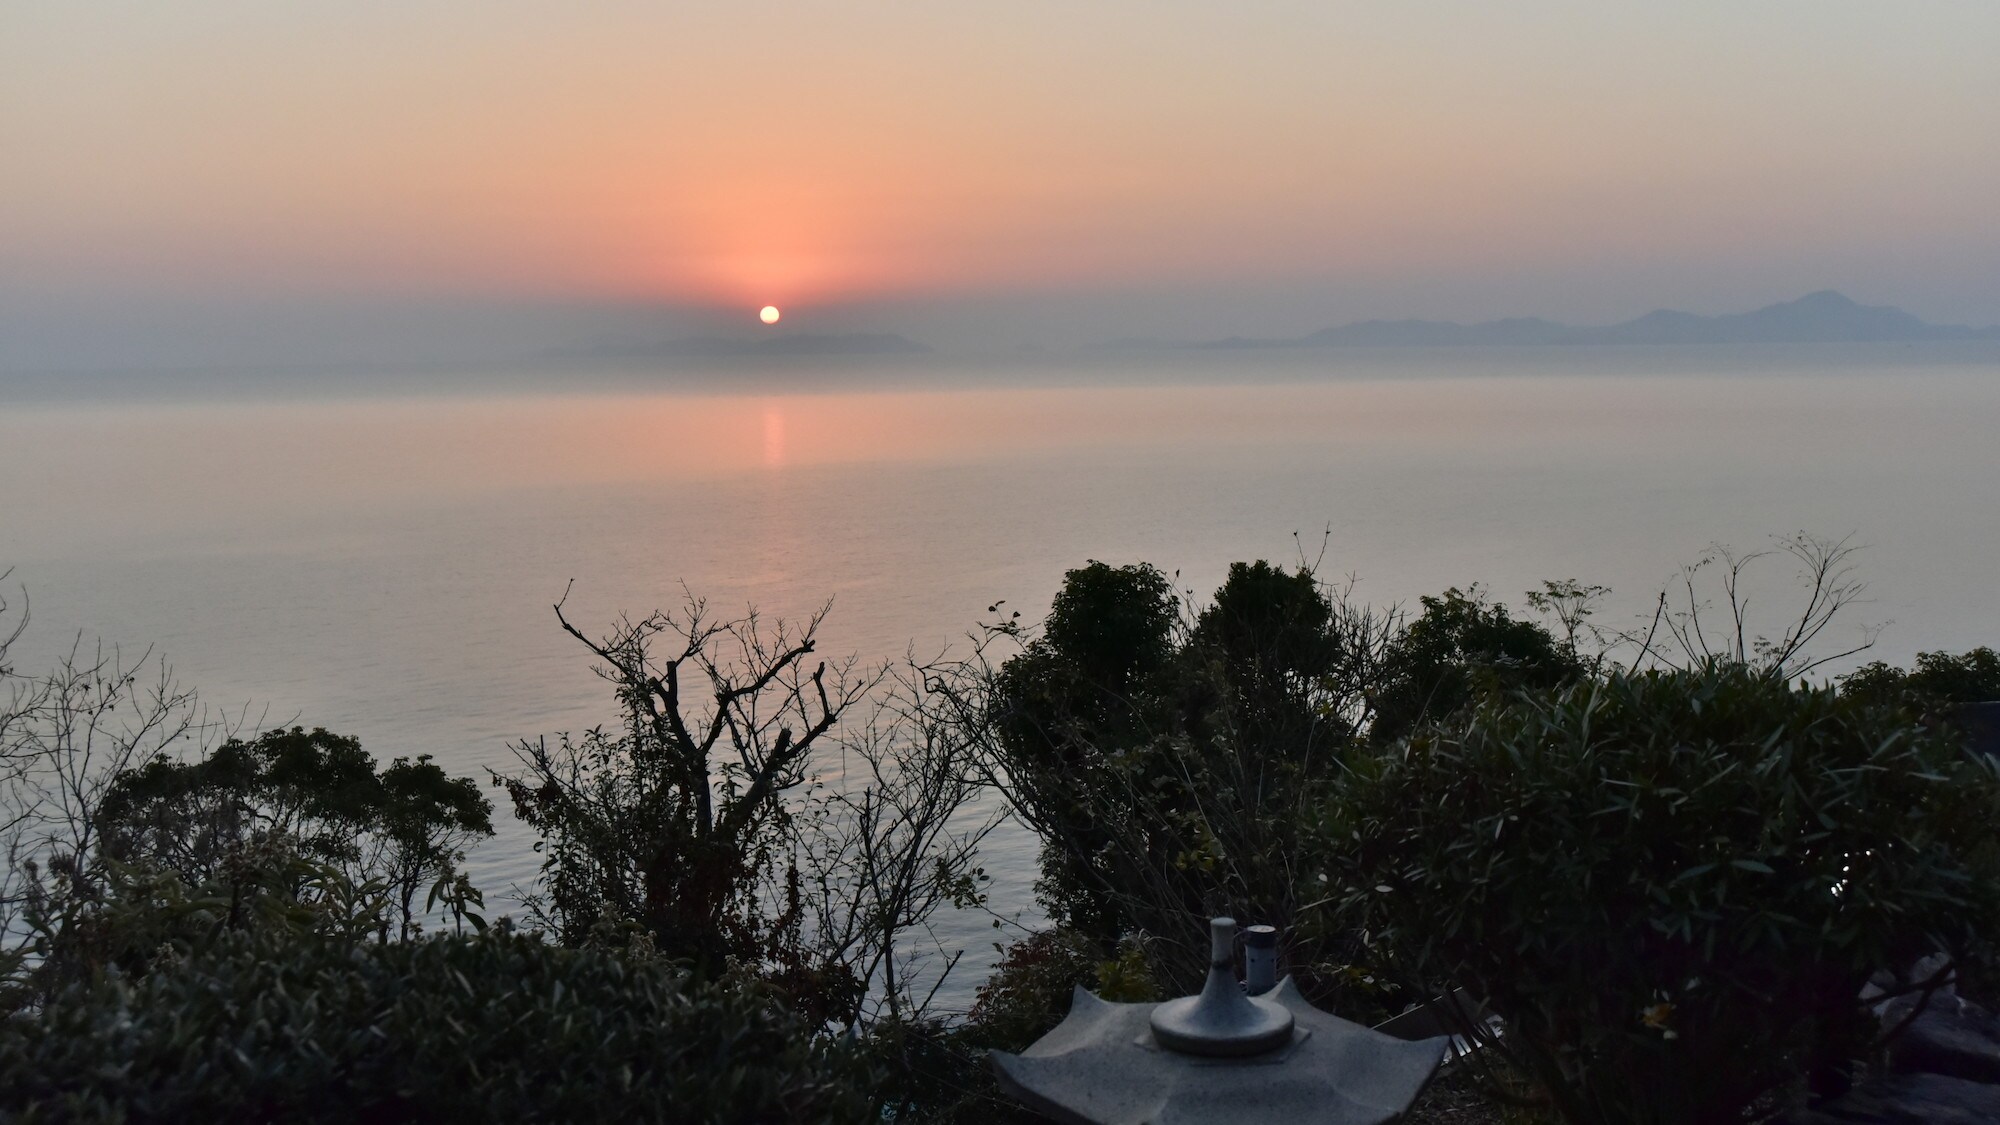 [Landscape] The beautiful Seto Inland Sea is right in front of you